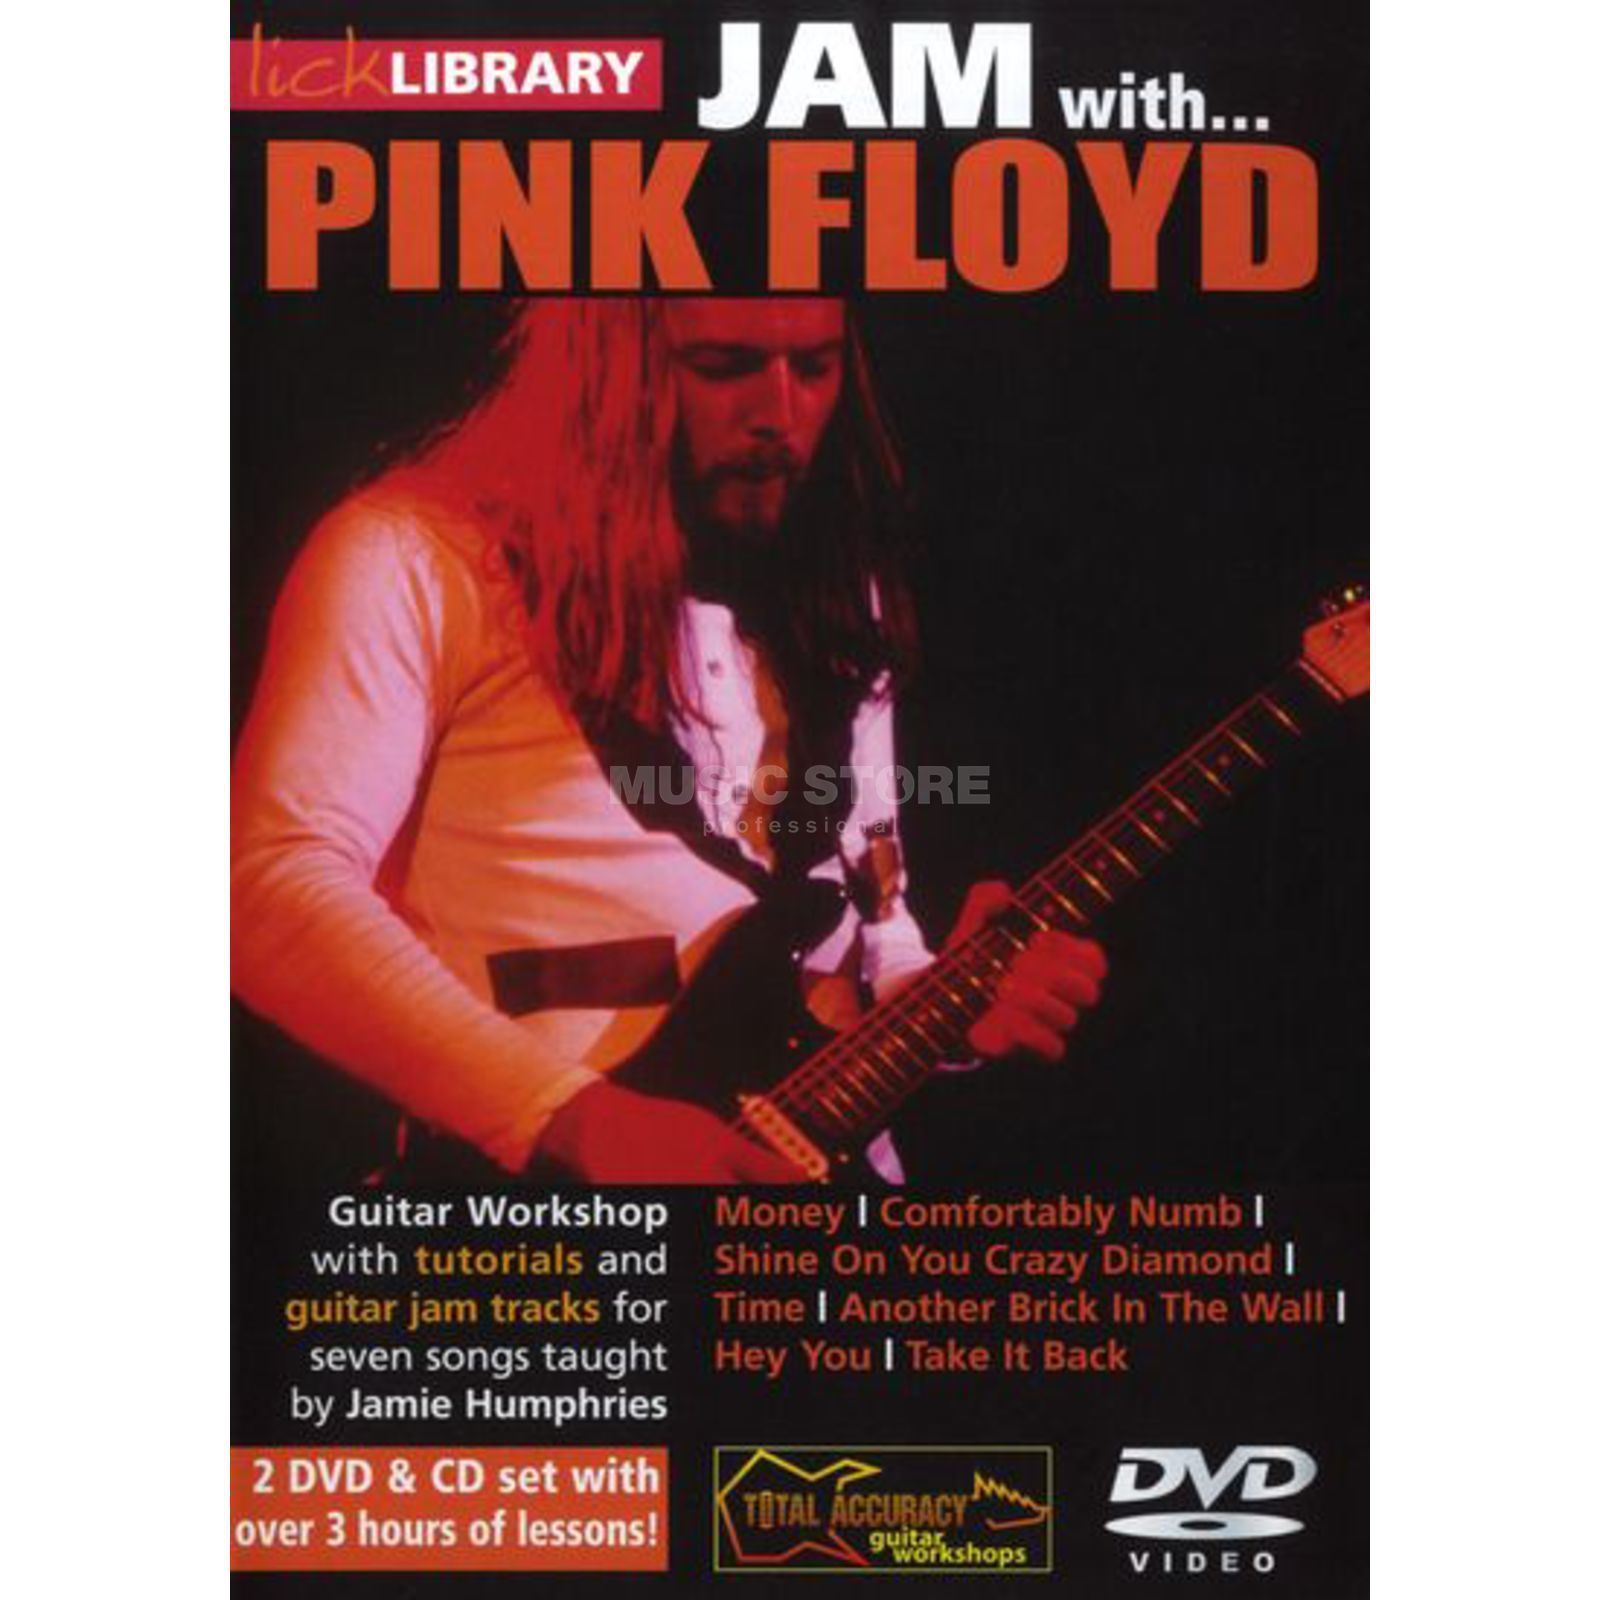 Lick library jam with pink floyd